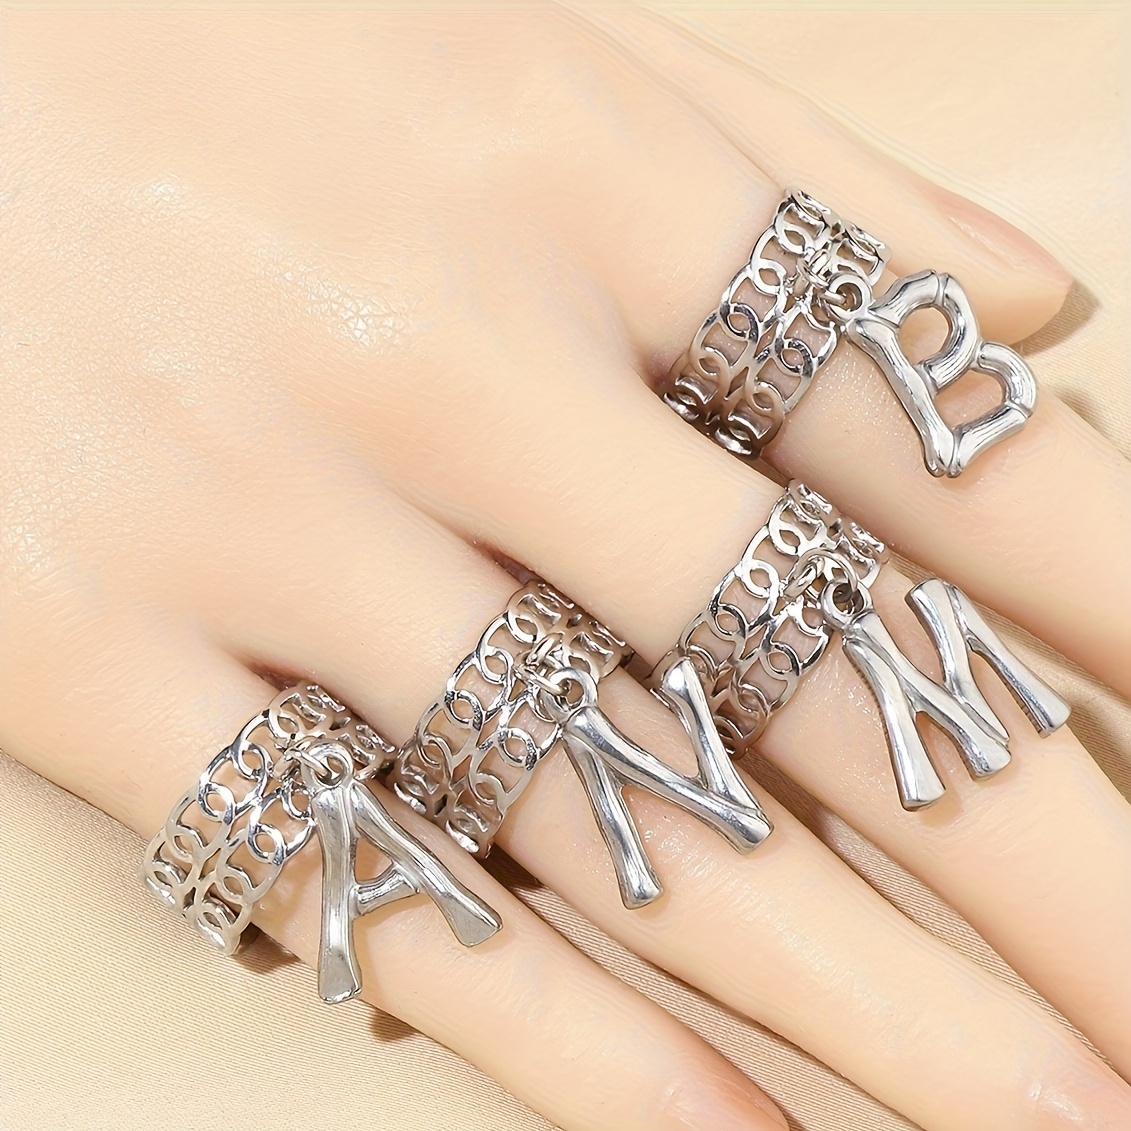 Chicque Punk Hand Chain Layered Finger Ring Claw Hand Bracelet Wedding  Party Hand Jewelry for Women and Girls (Silver)